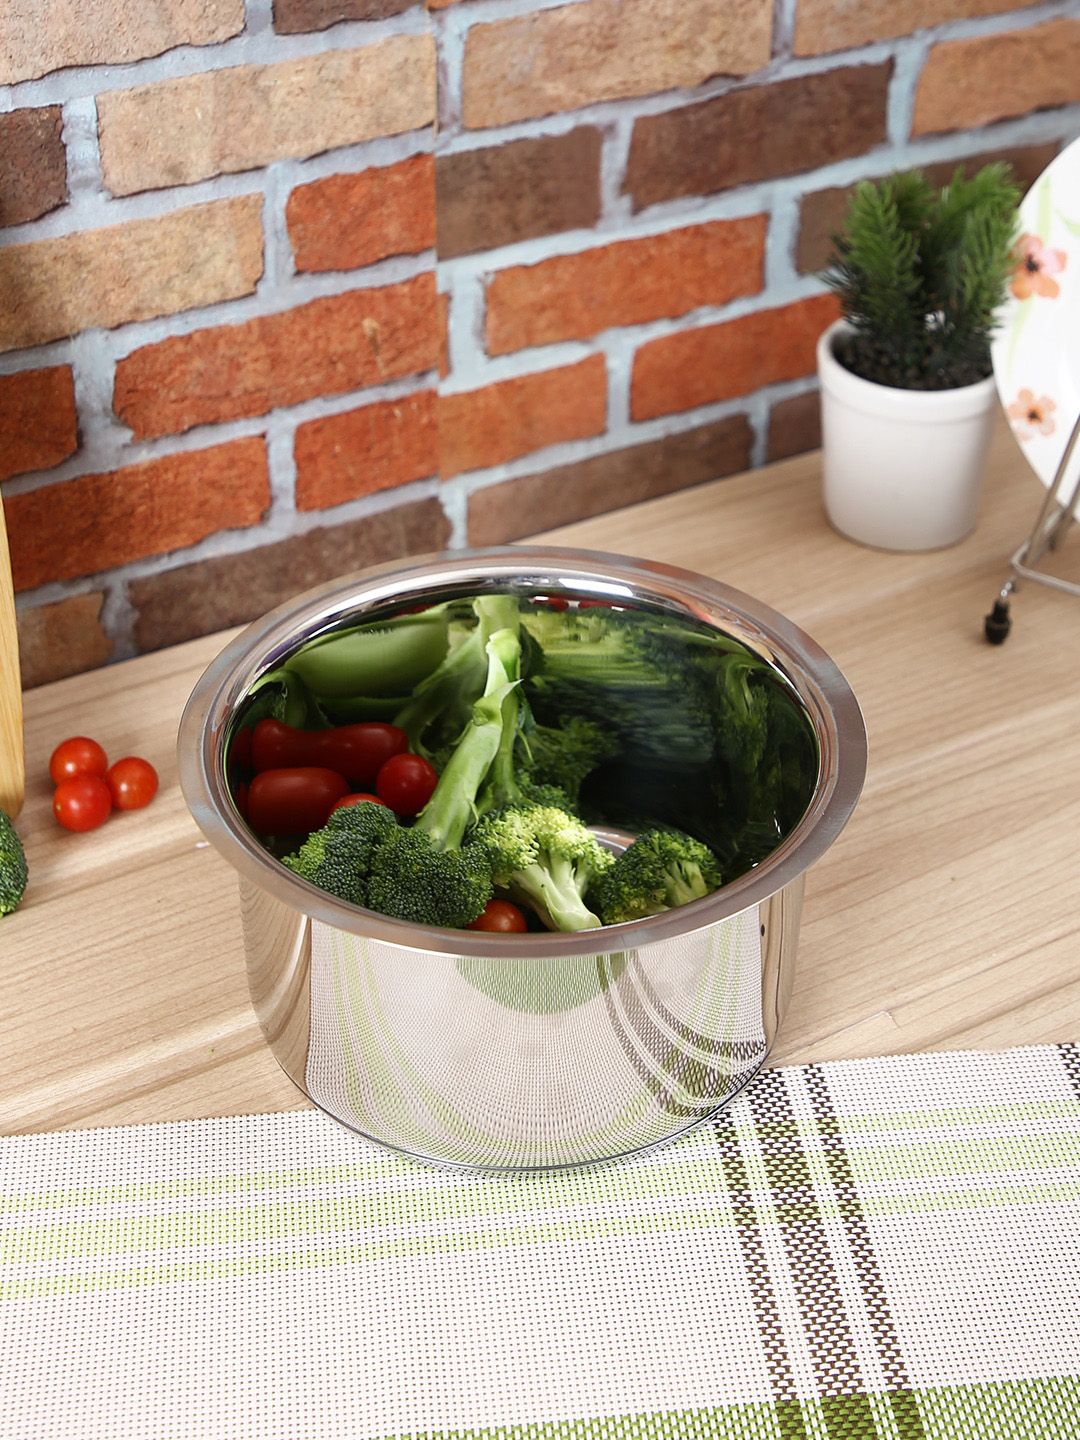 AURUM Silver-Toned Stainless Steel Stew Pot Price in India